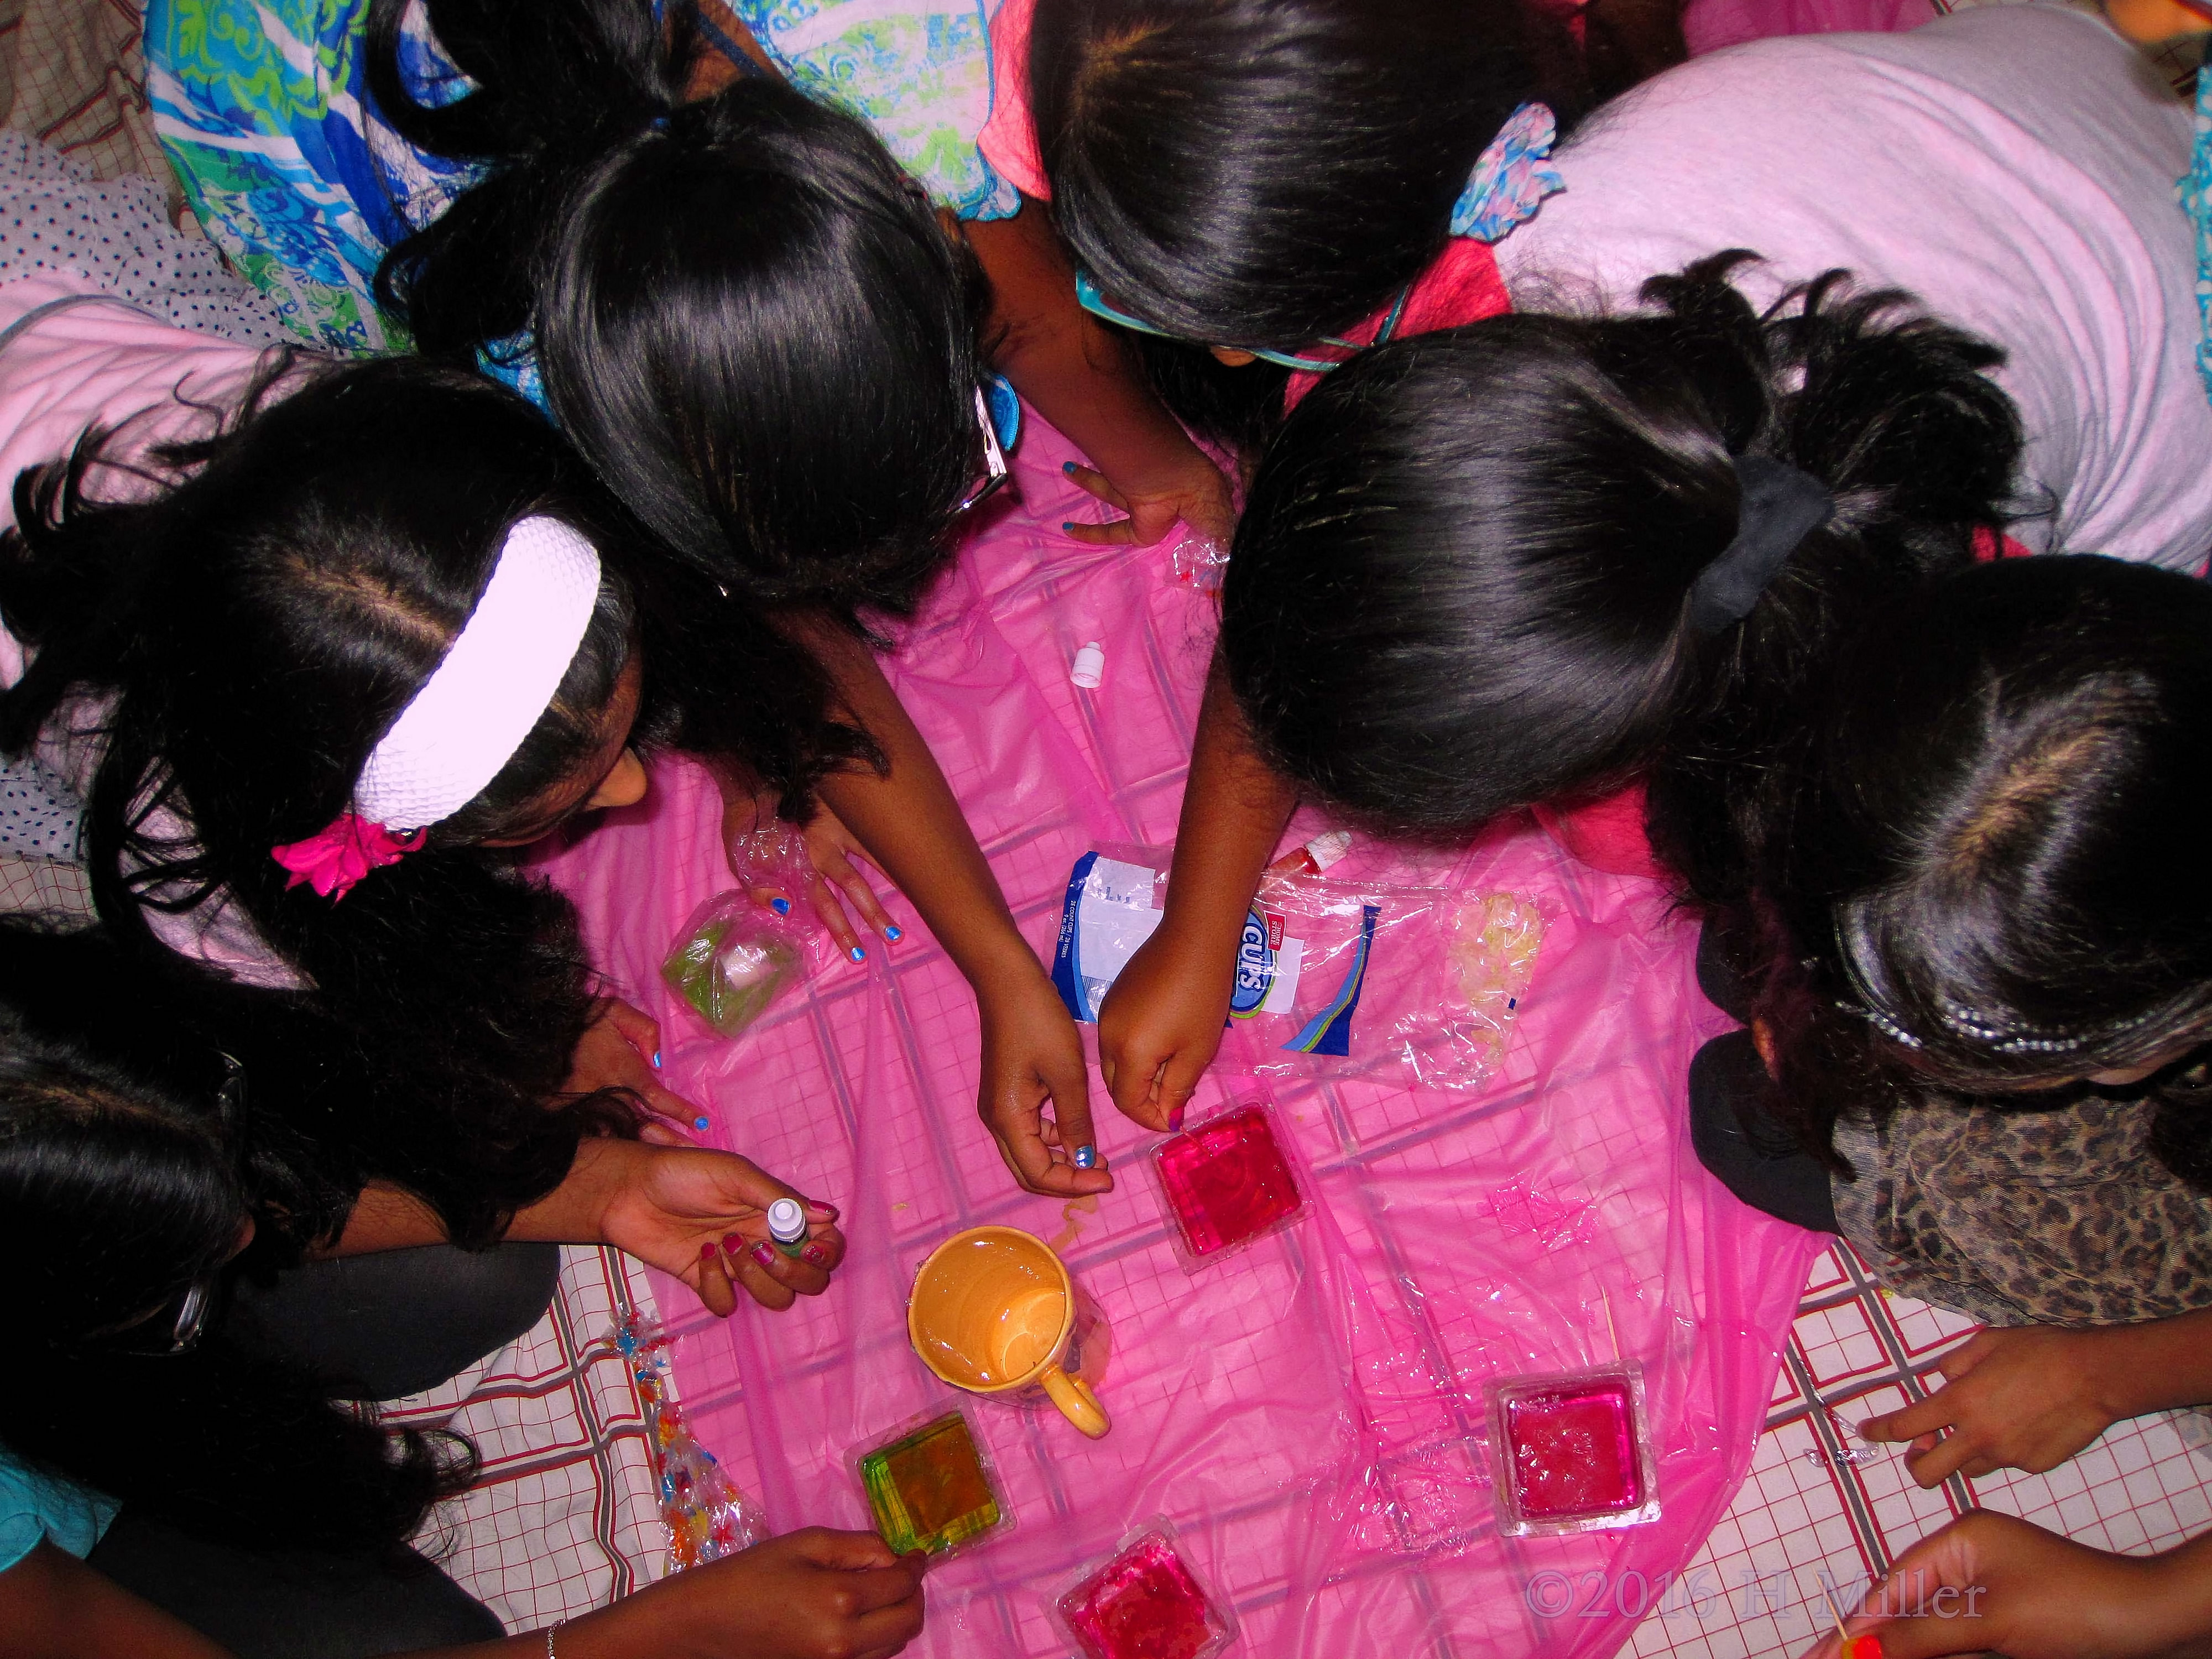 Making Homemade Soap Craft Projects At The Spa For Girls! 